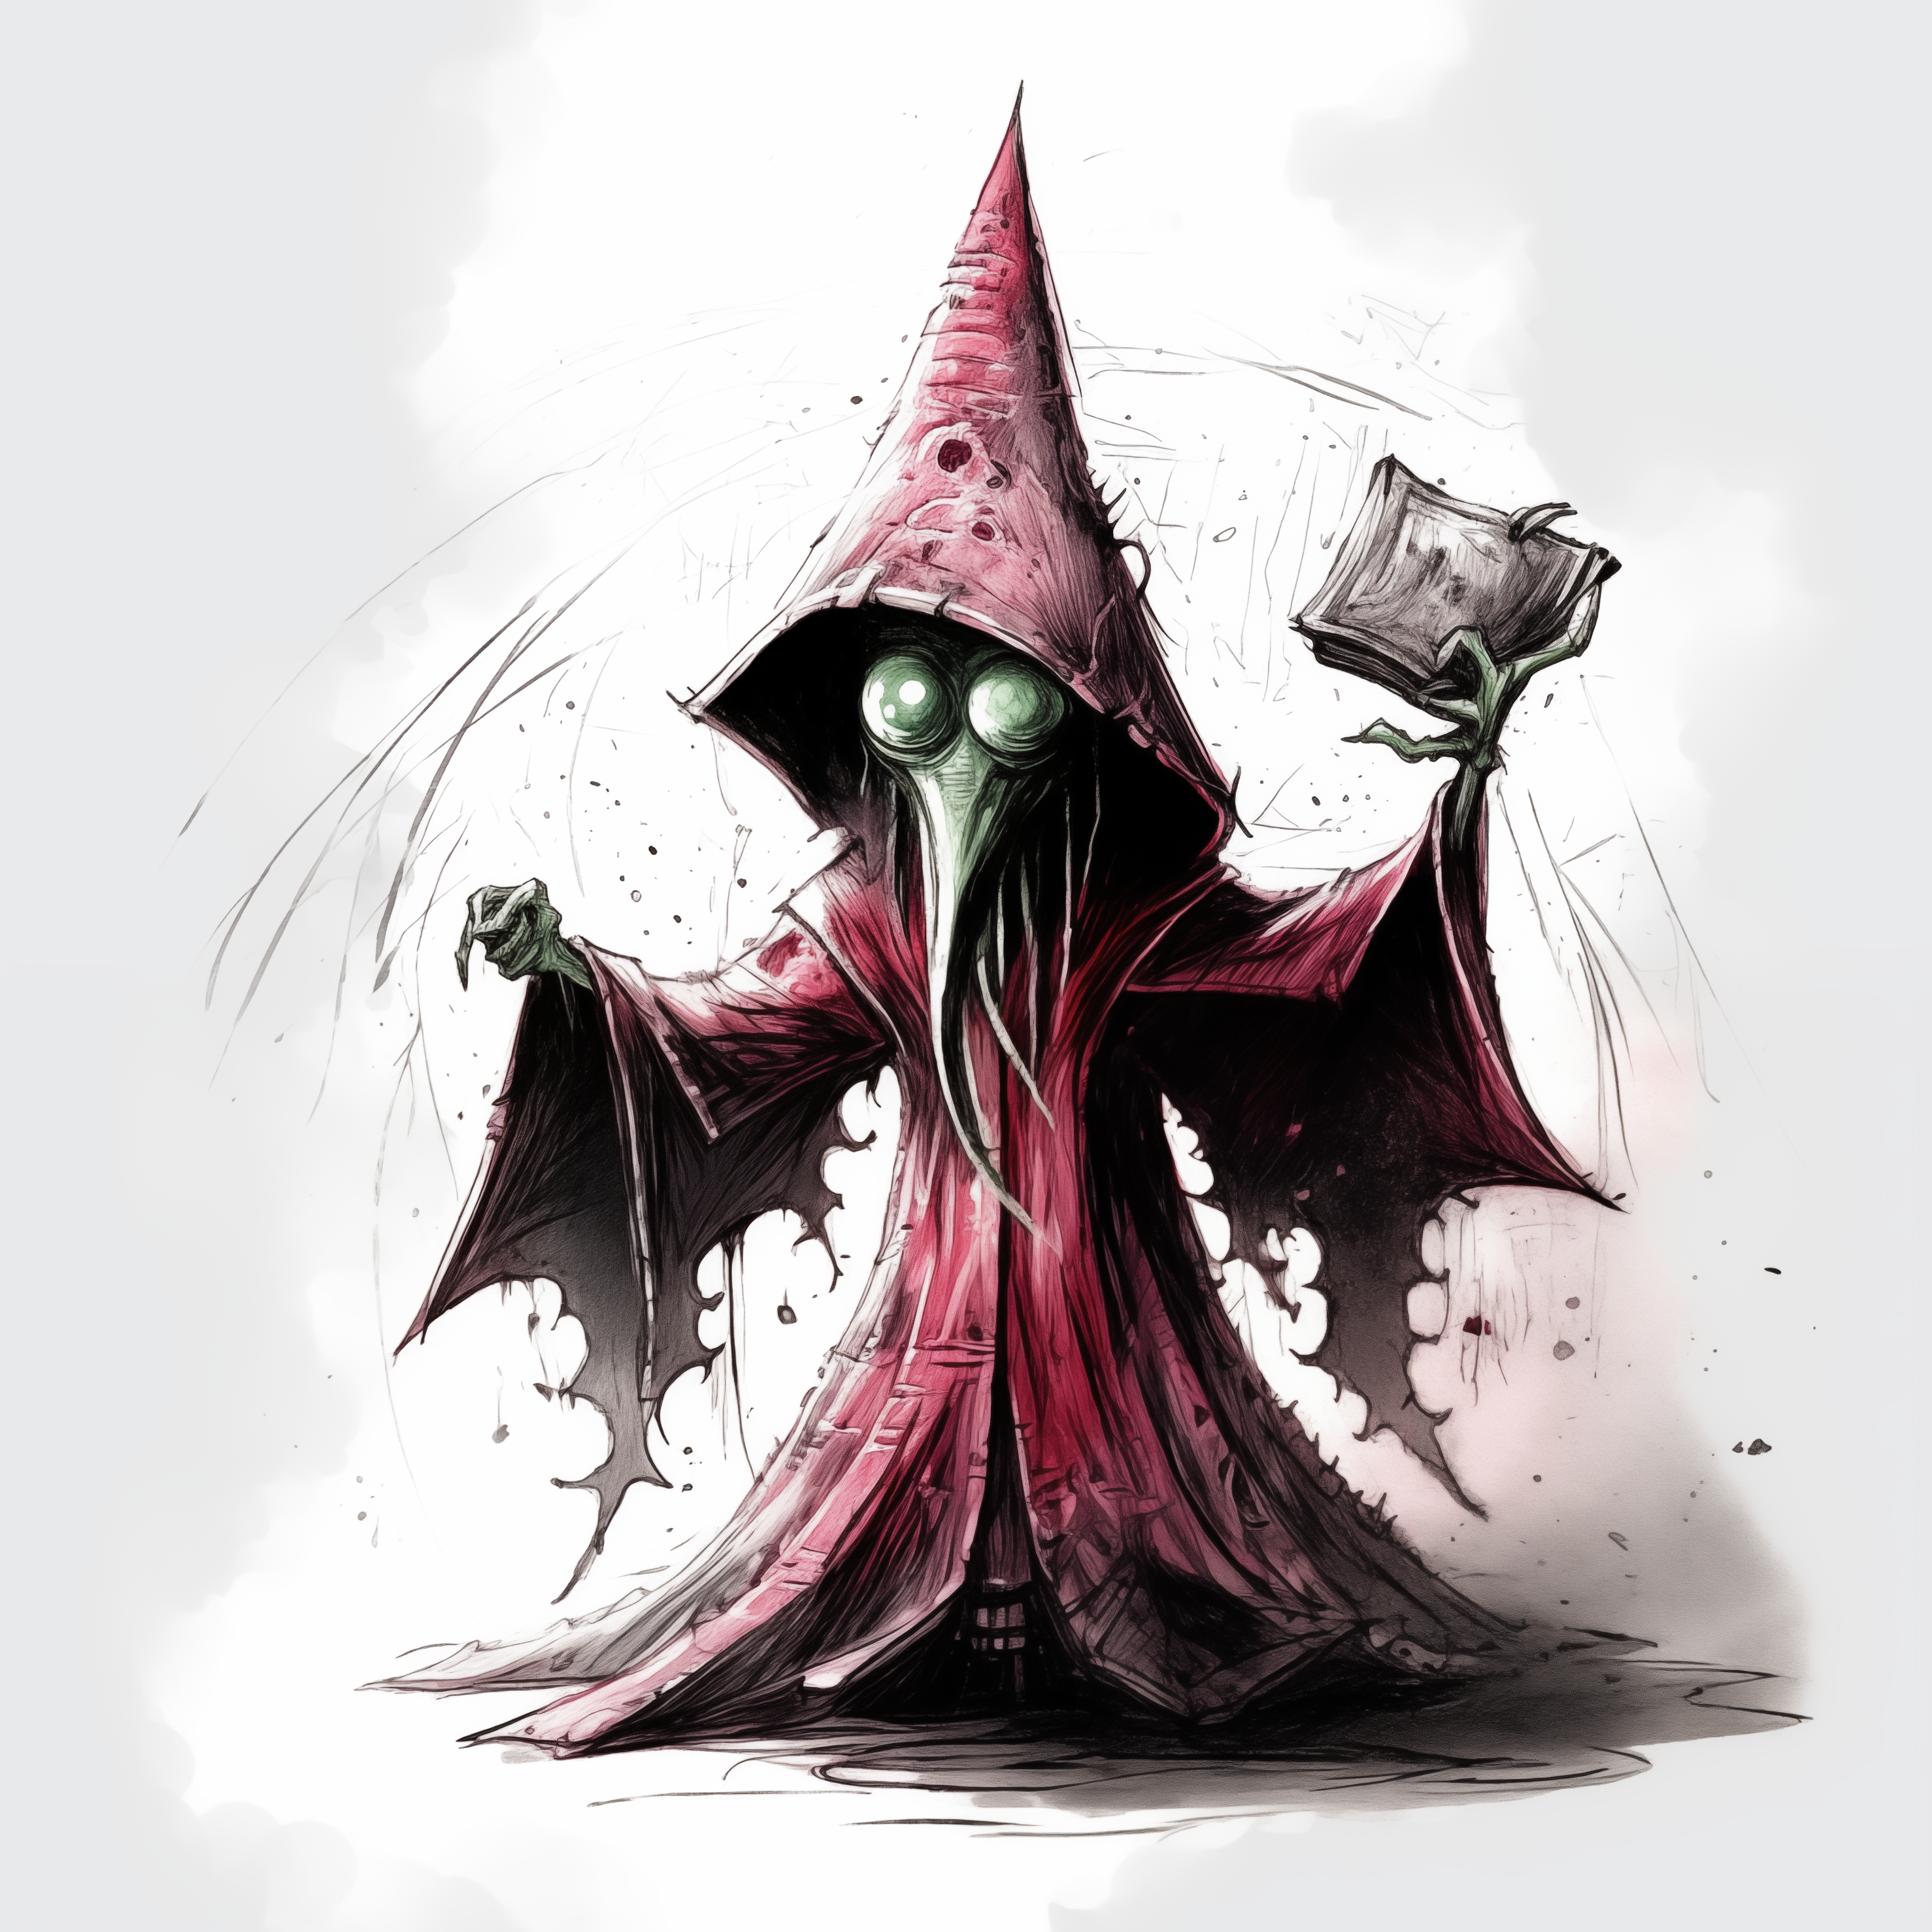 S’klas image of hooded figure in torn red robes with large eyes and tentacles for a beard. Image generated in Midjourney